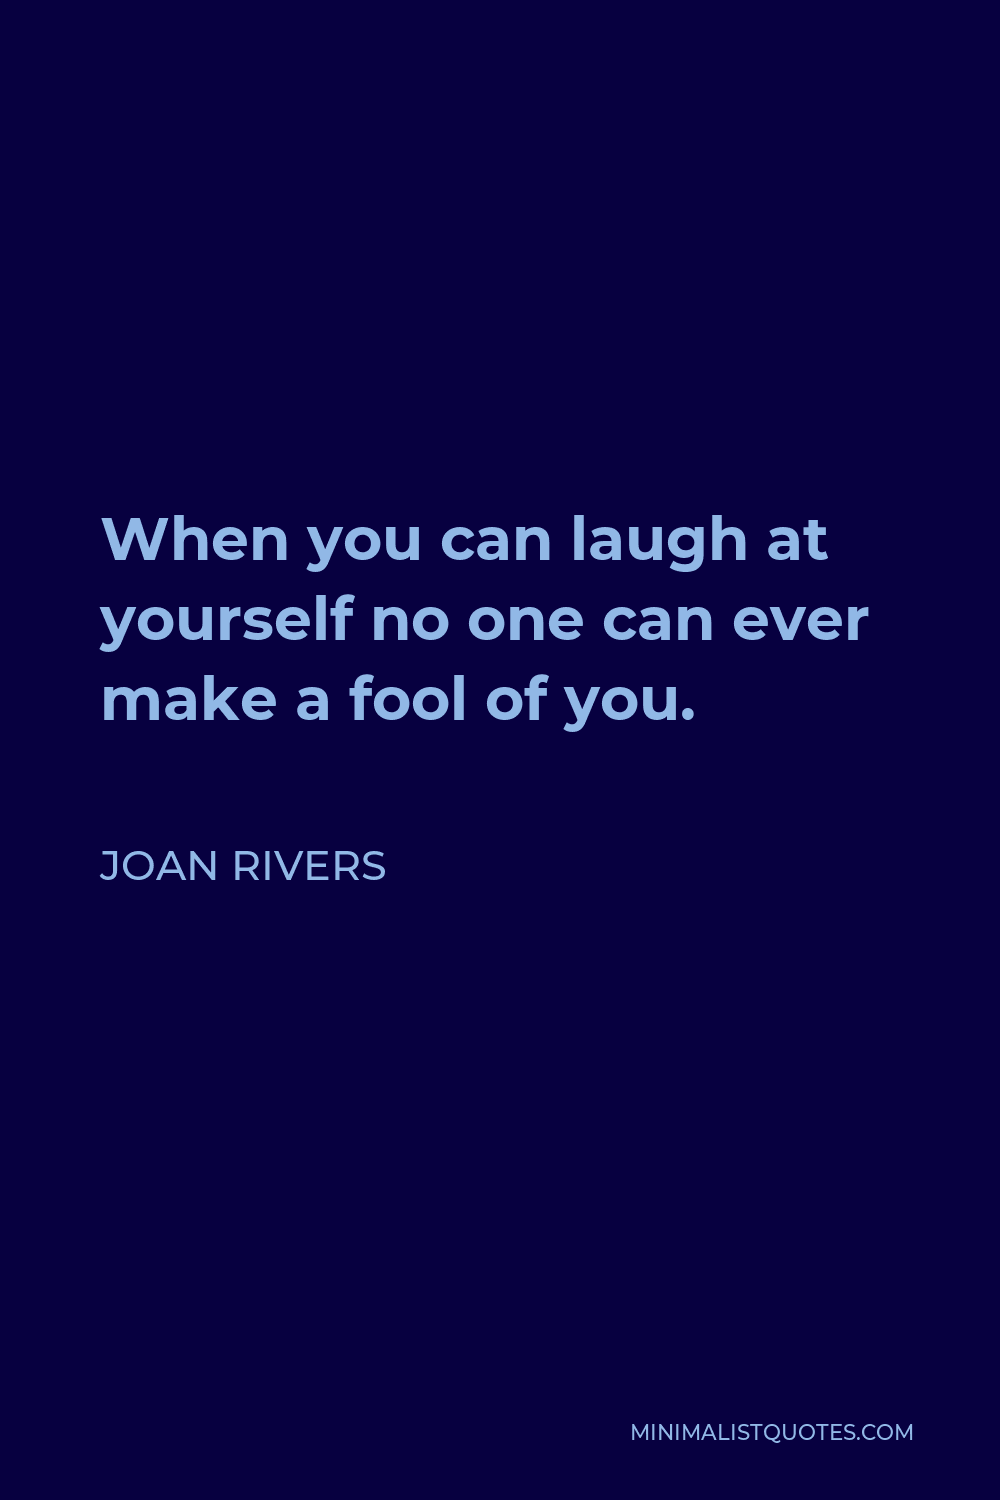 Joan Rivers Quote - When you can laugh at yourself no one can ever make a fool of you.